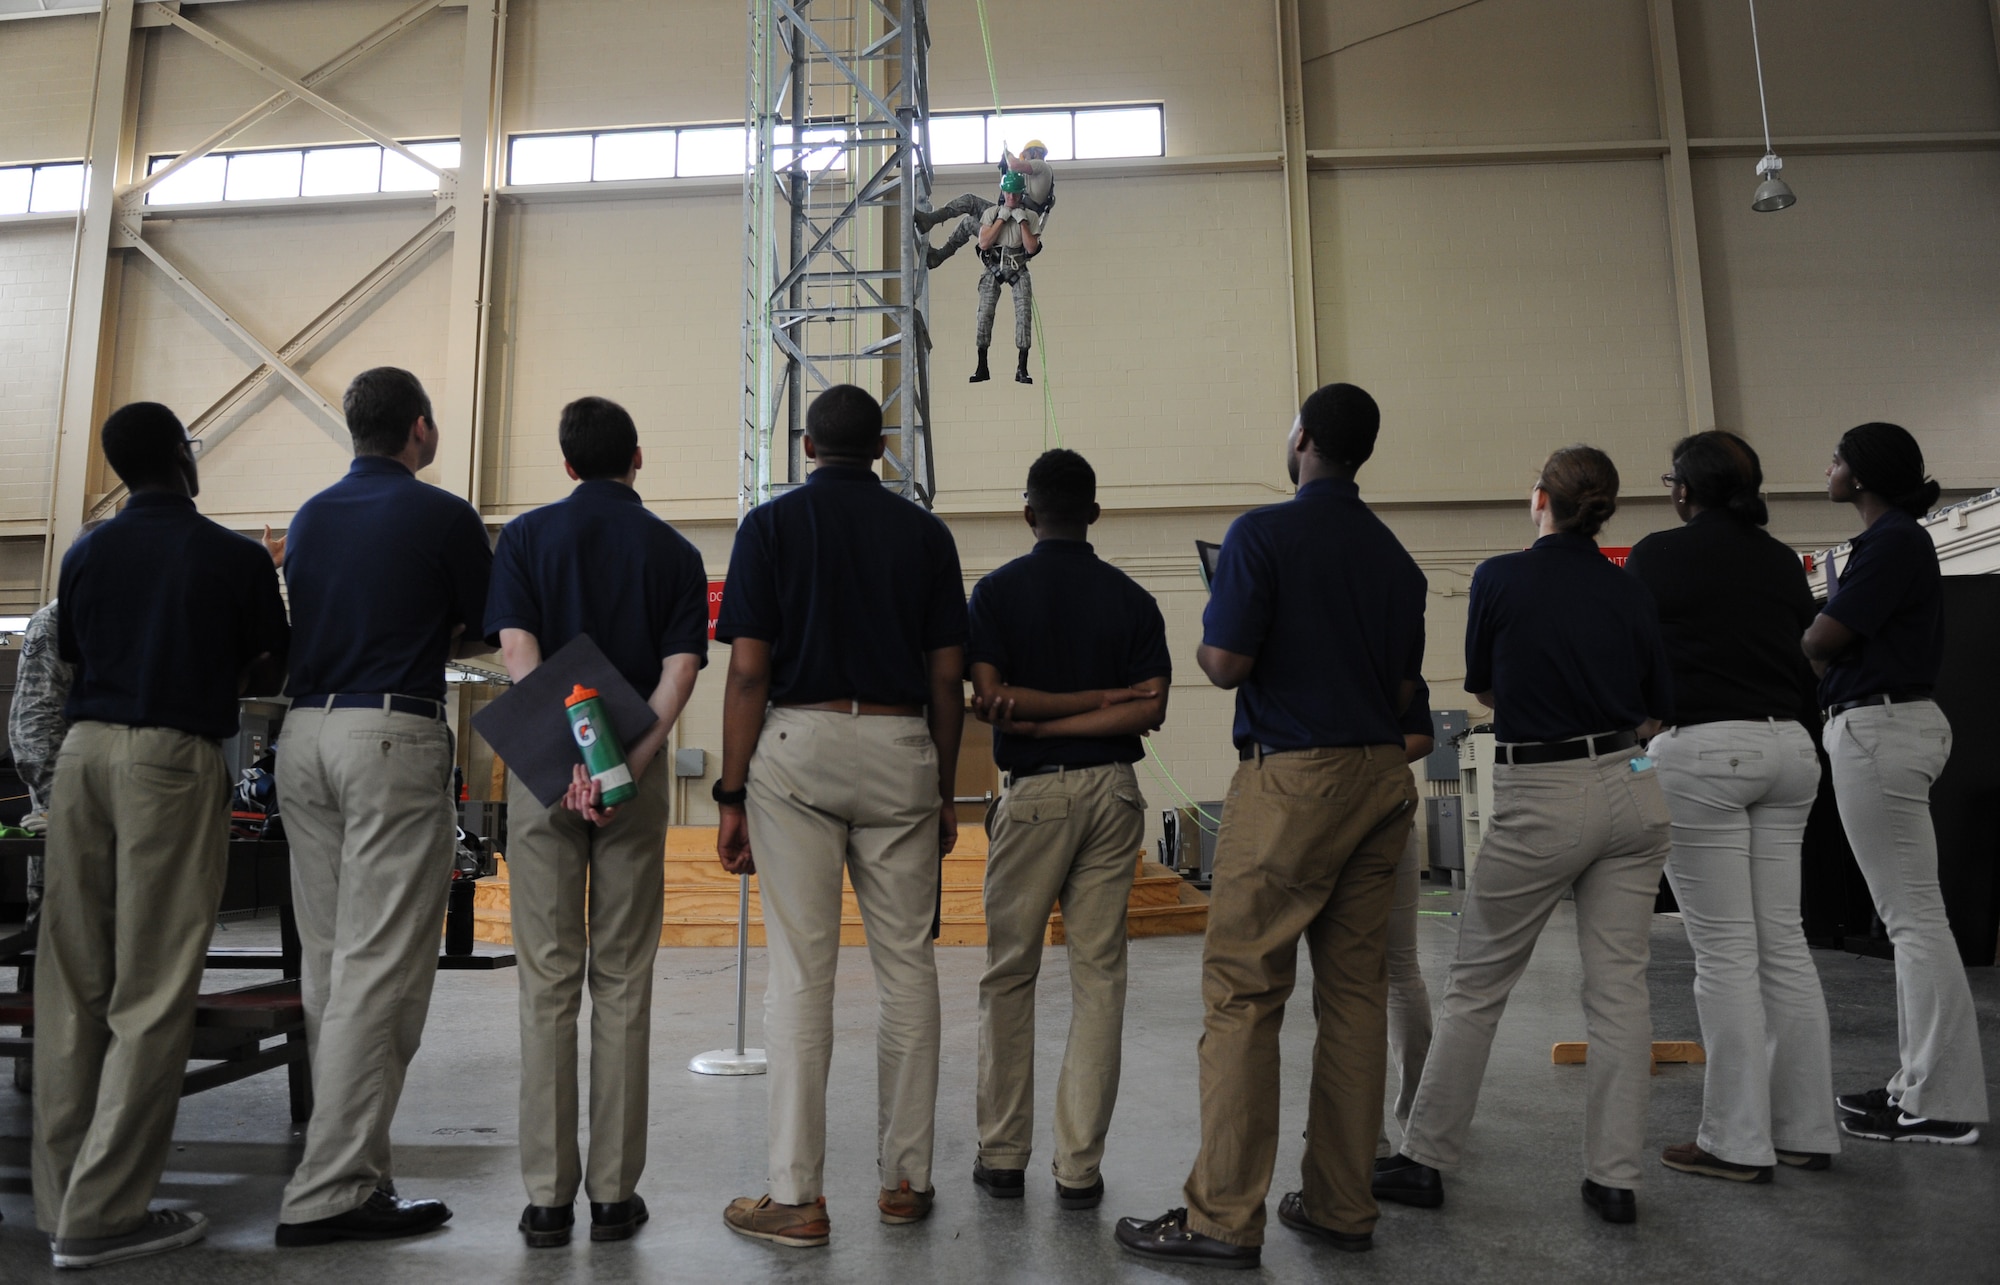 Air Force ROTC cadets watch a tower demonstration by members of the 334th Training Squadron at Matero Hall during Pathways to Blue April 15, 2016, Keesler Air Force Base, Miss. Pathways to Blue, a diversity outreach event hosted by 2nd Air Force, the 81st Training Wing and the 403rd Wing, included more than 180 cadets from Air Force ROTC detachments from various colleges and universities. Cadets received hands-on briefings on technical and flying operations and an orientation flight in support of the Air Force's Diversity Strategic Roadmap program. (U.S. Air Force photo by Kemberly Groue)